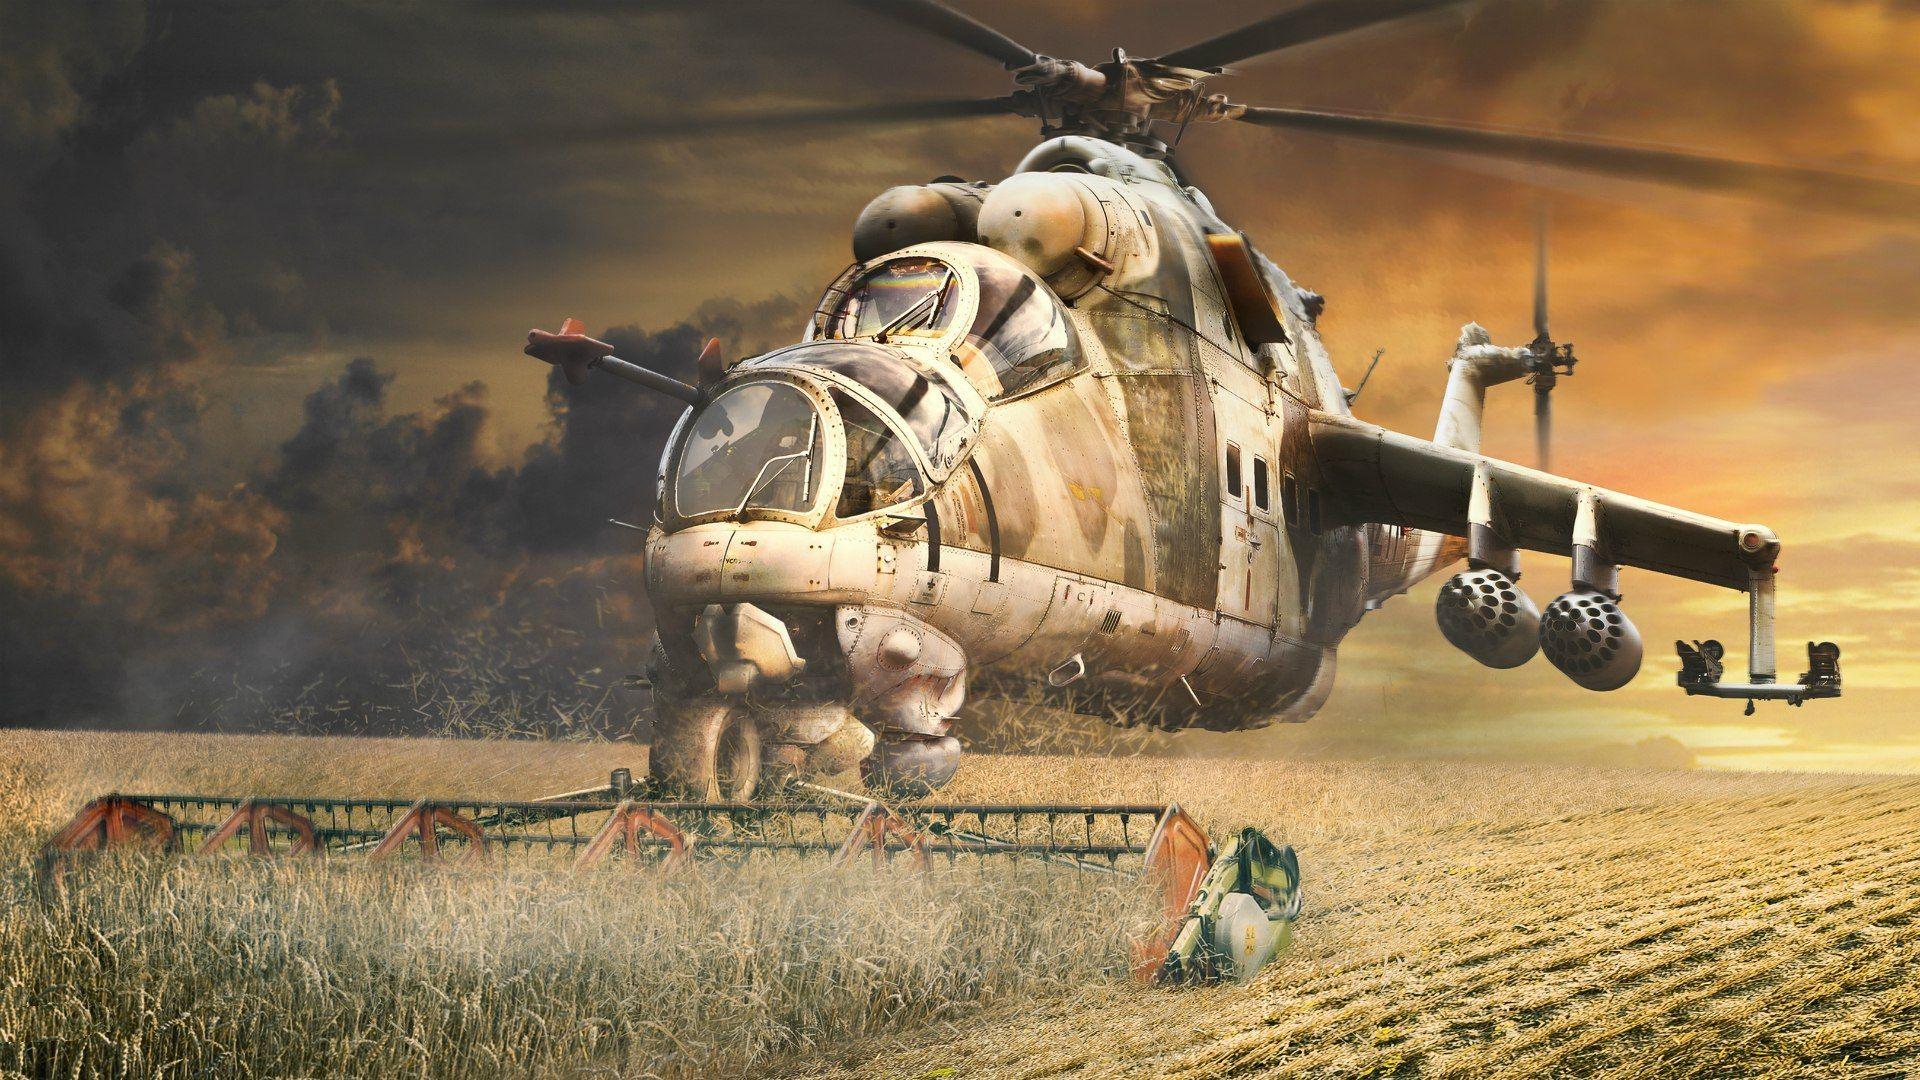 MI 24 As A Harvester Wallpaper And Image, Picture